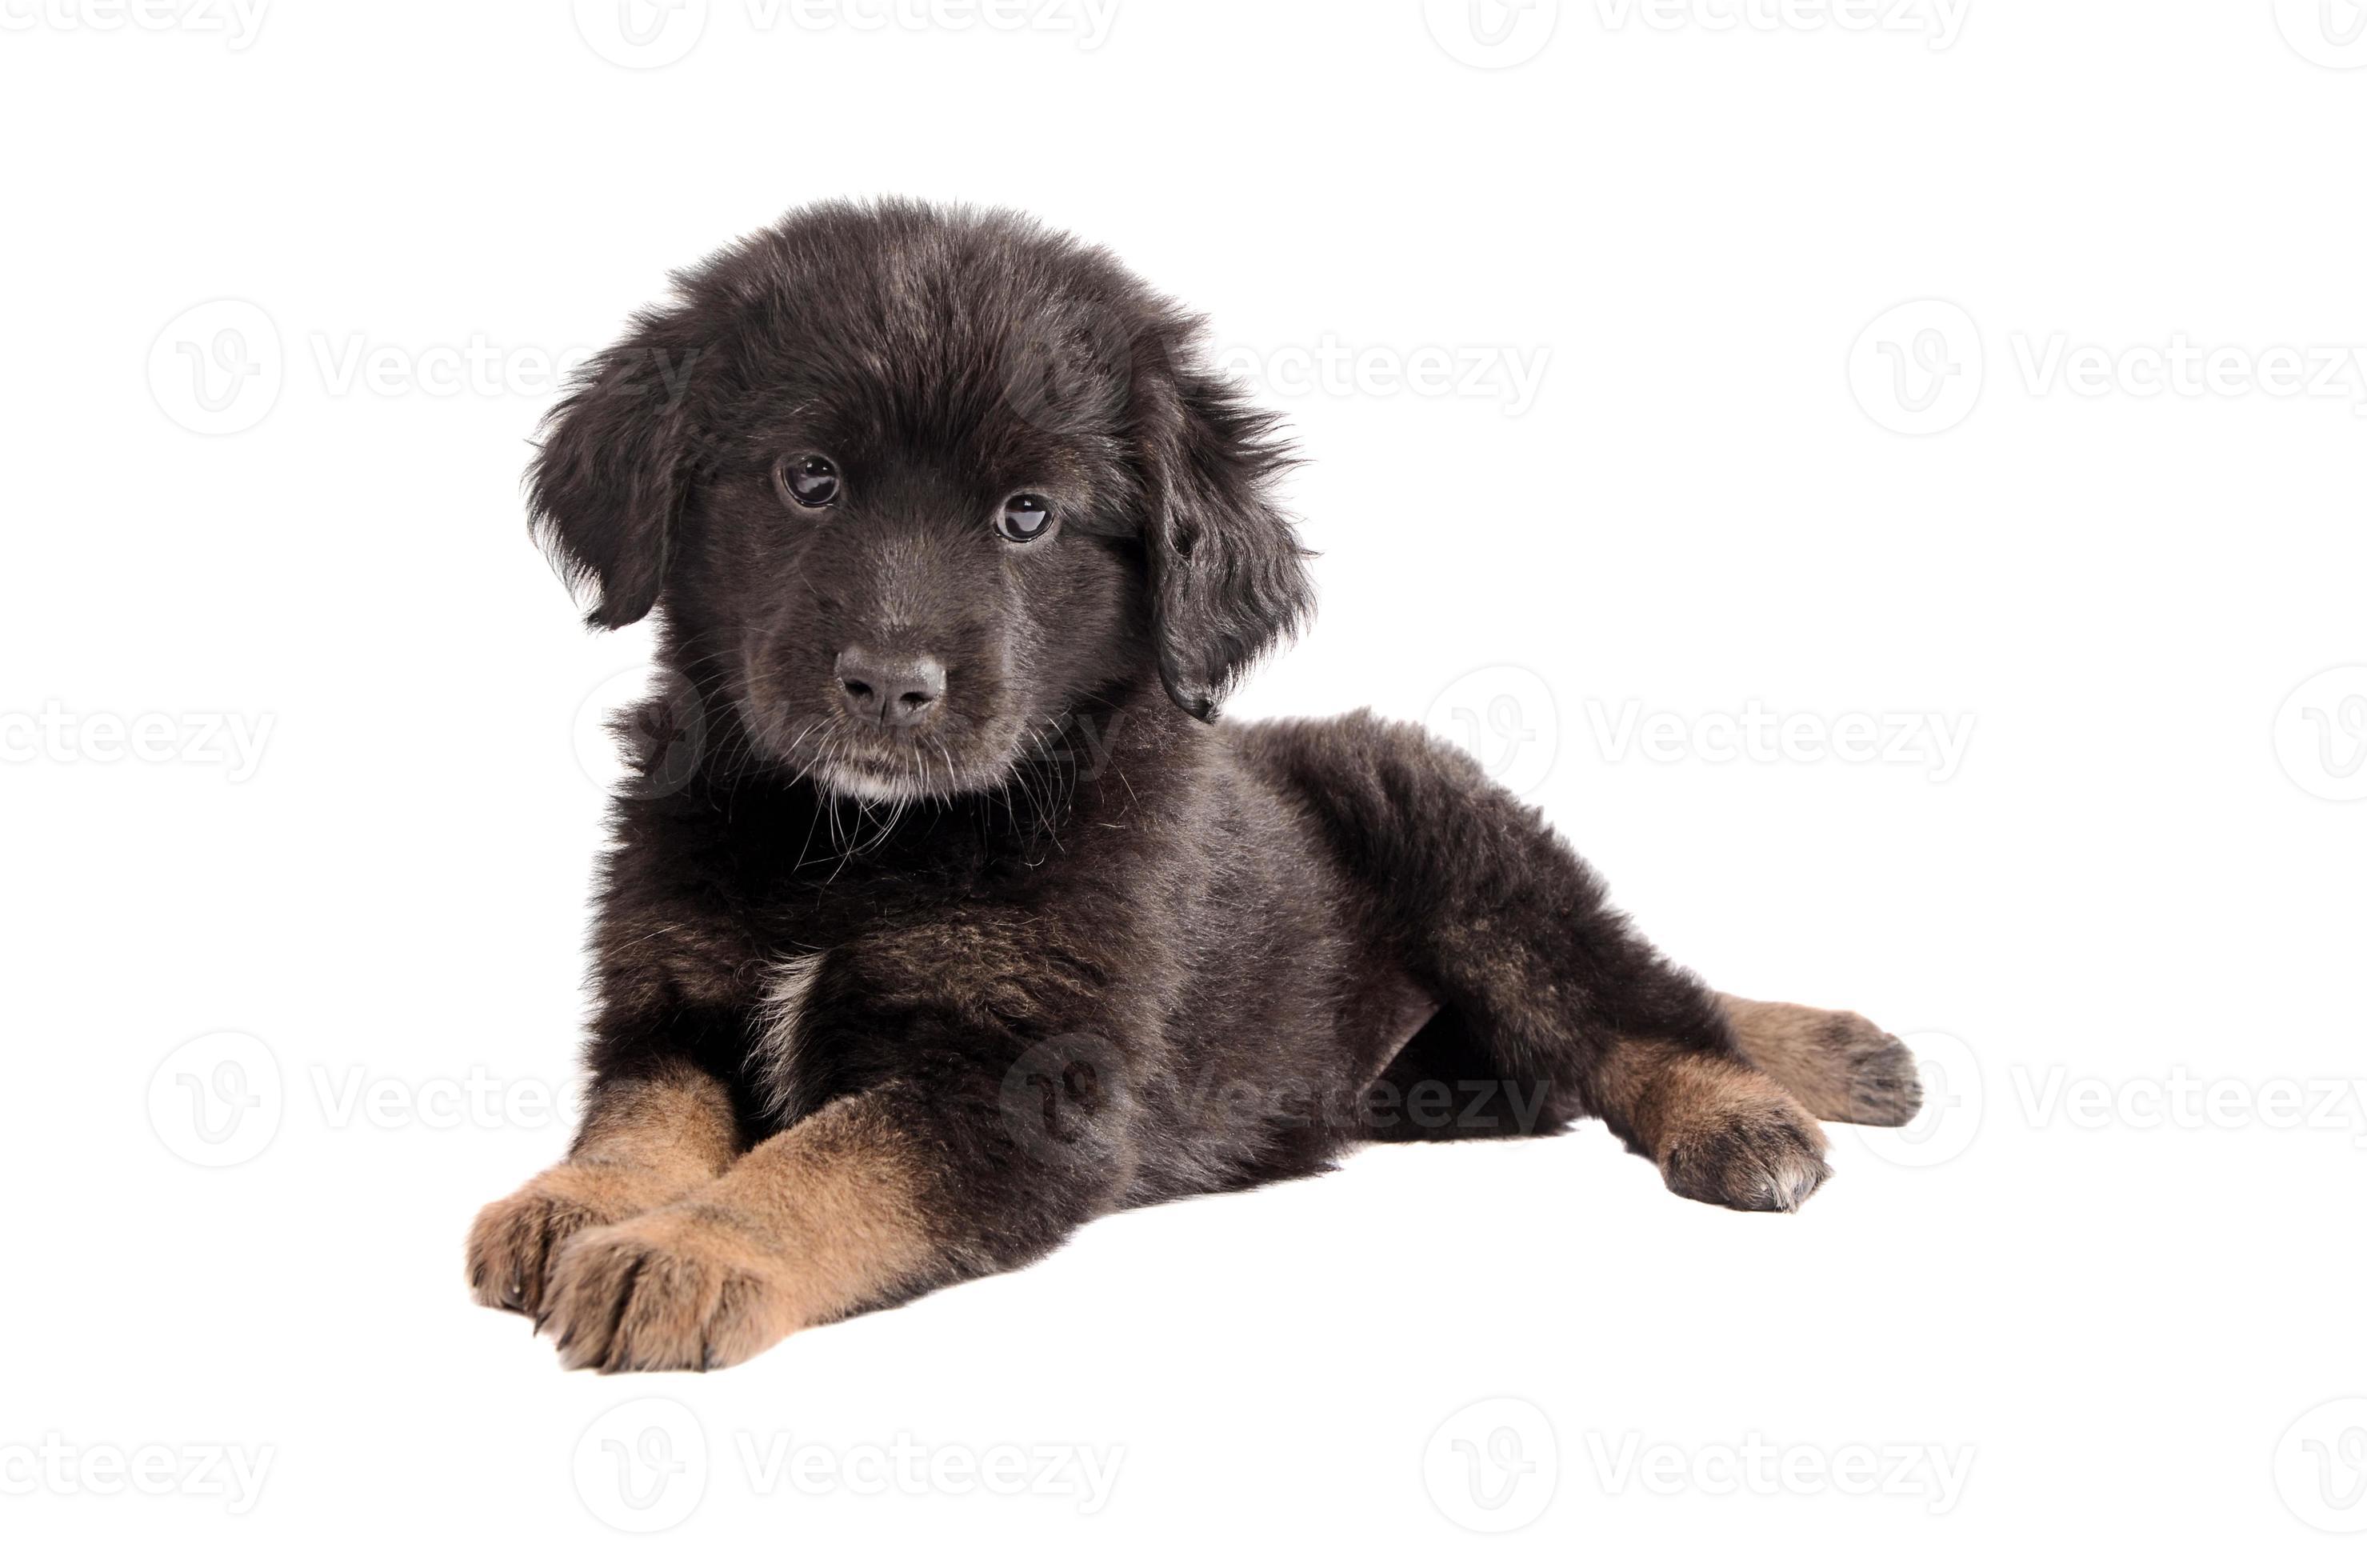 Adorable black and brown fluffy puppy on white photo